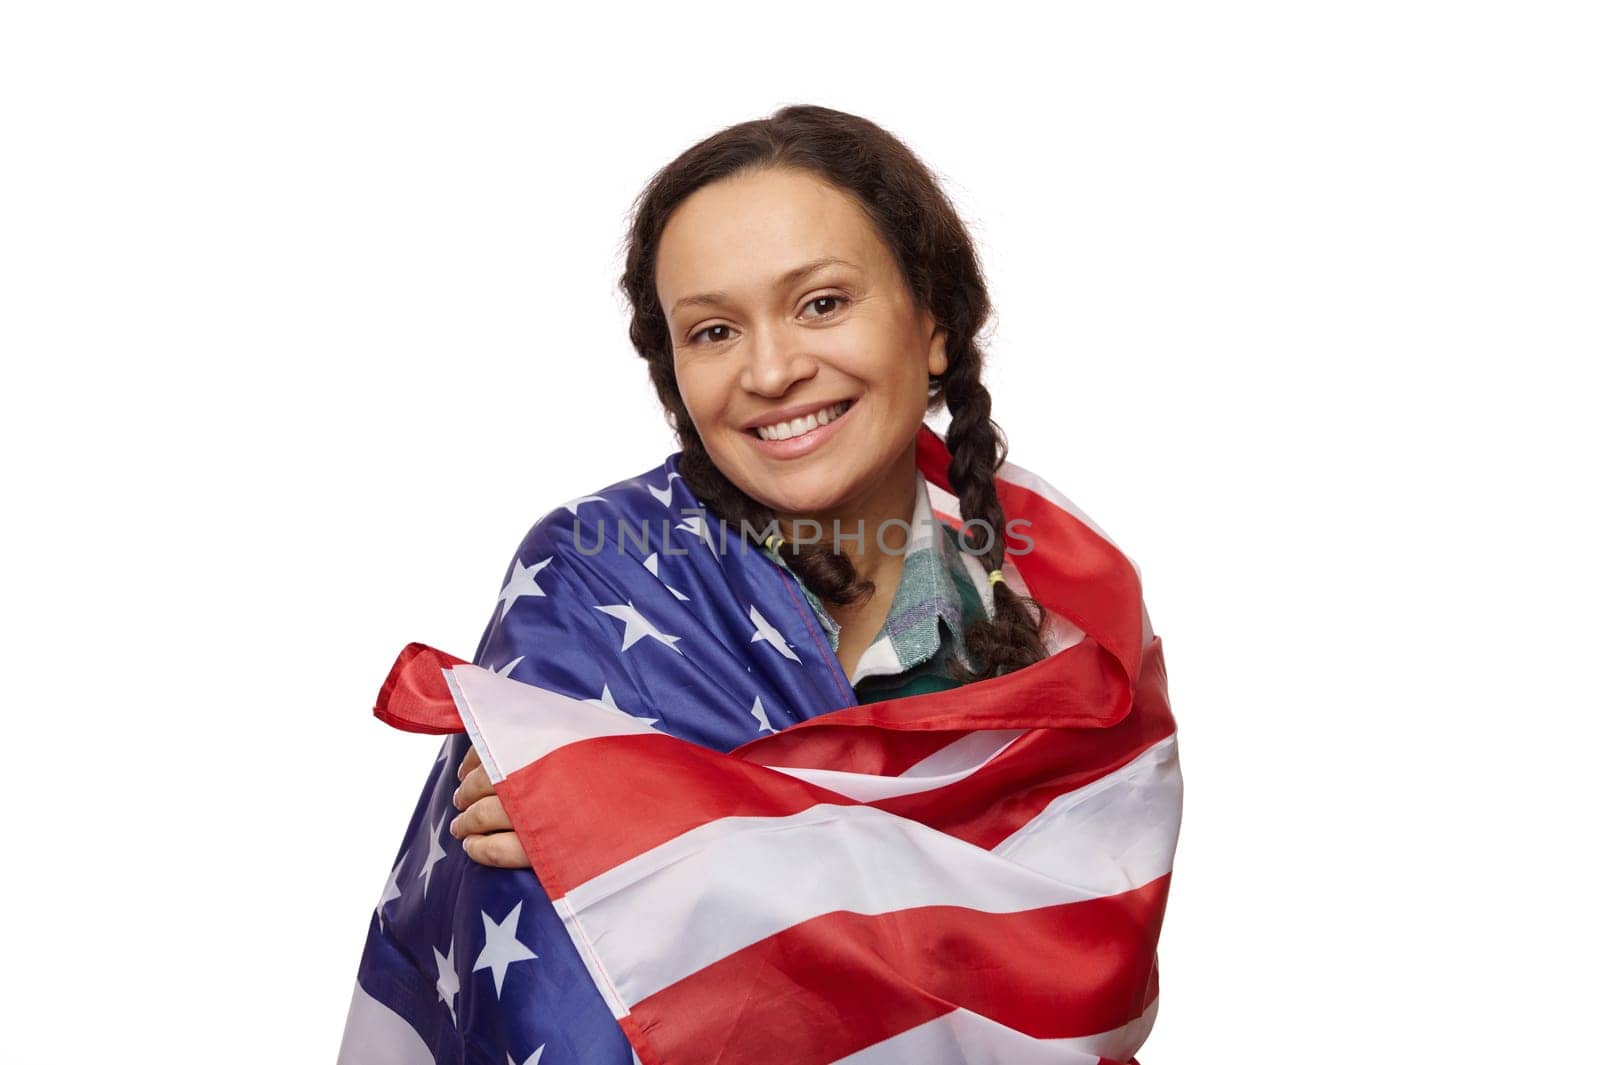 Isolated portrait on white background of charming ethnic middle-aged woman, smiling at camera, wrapped in USA flag by artgf